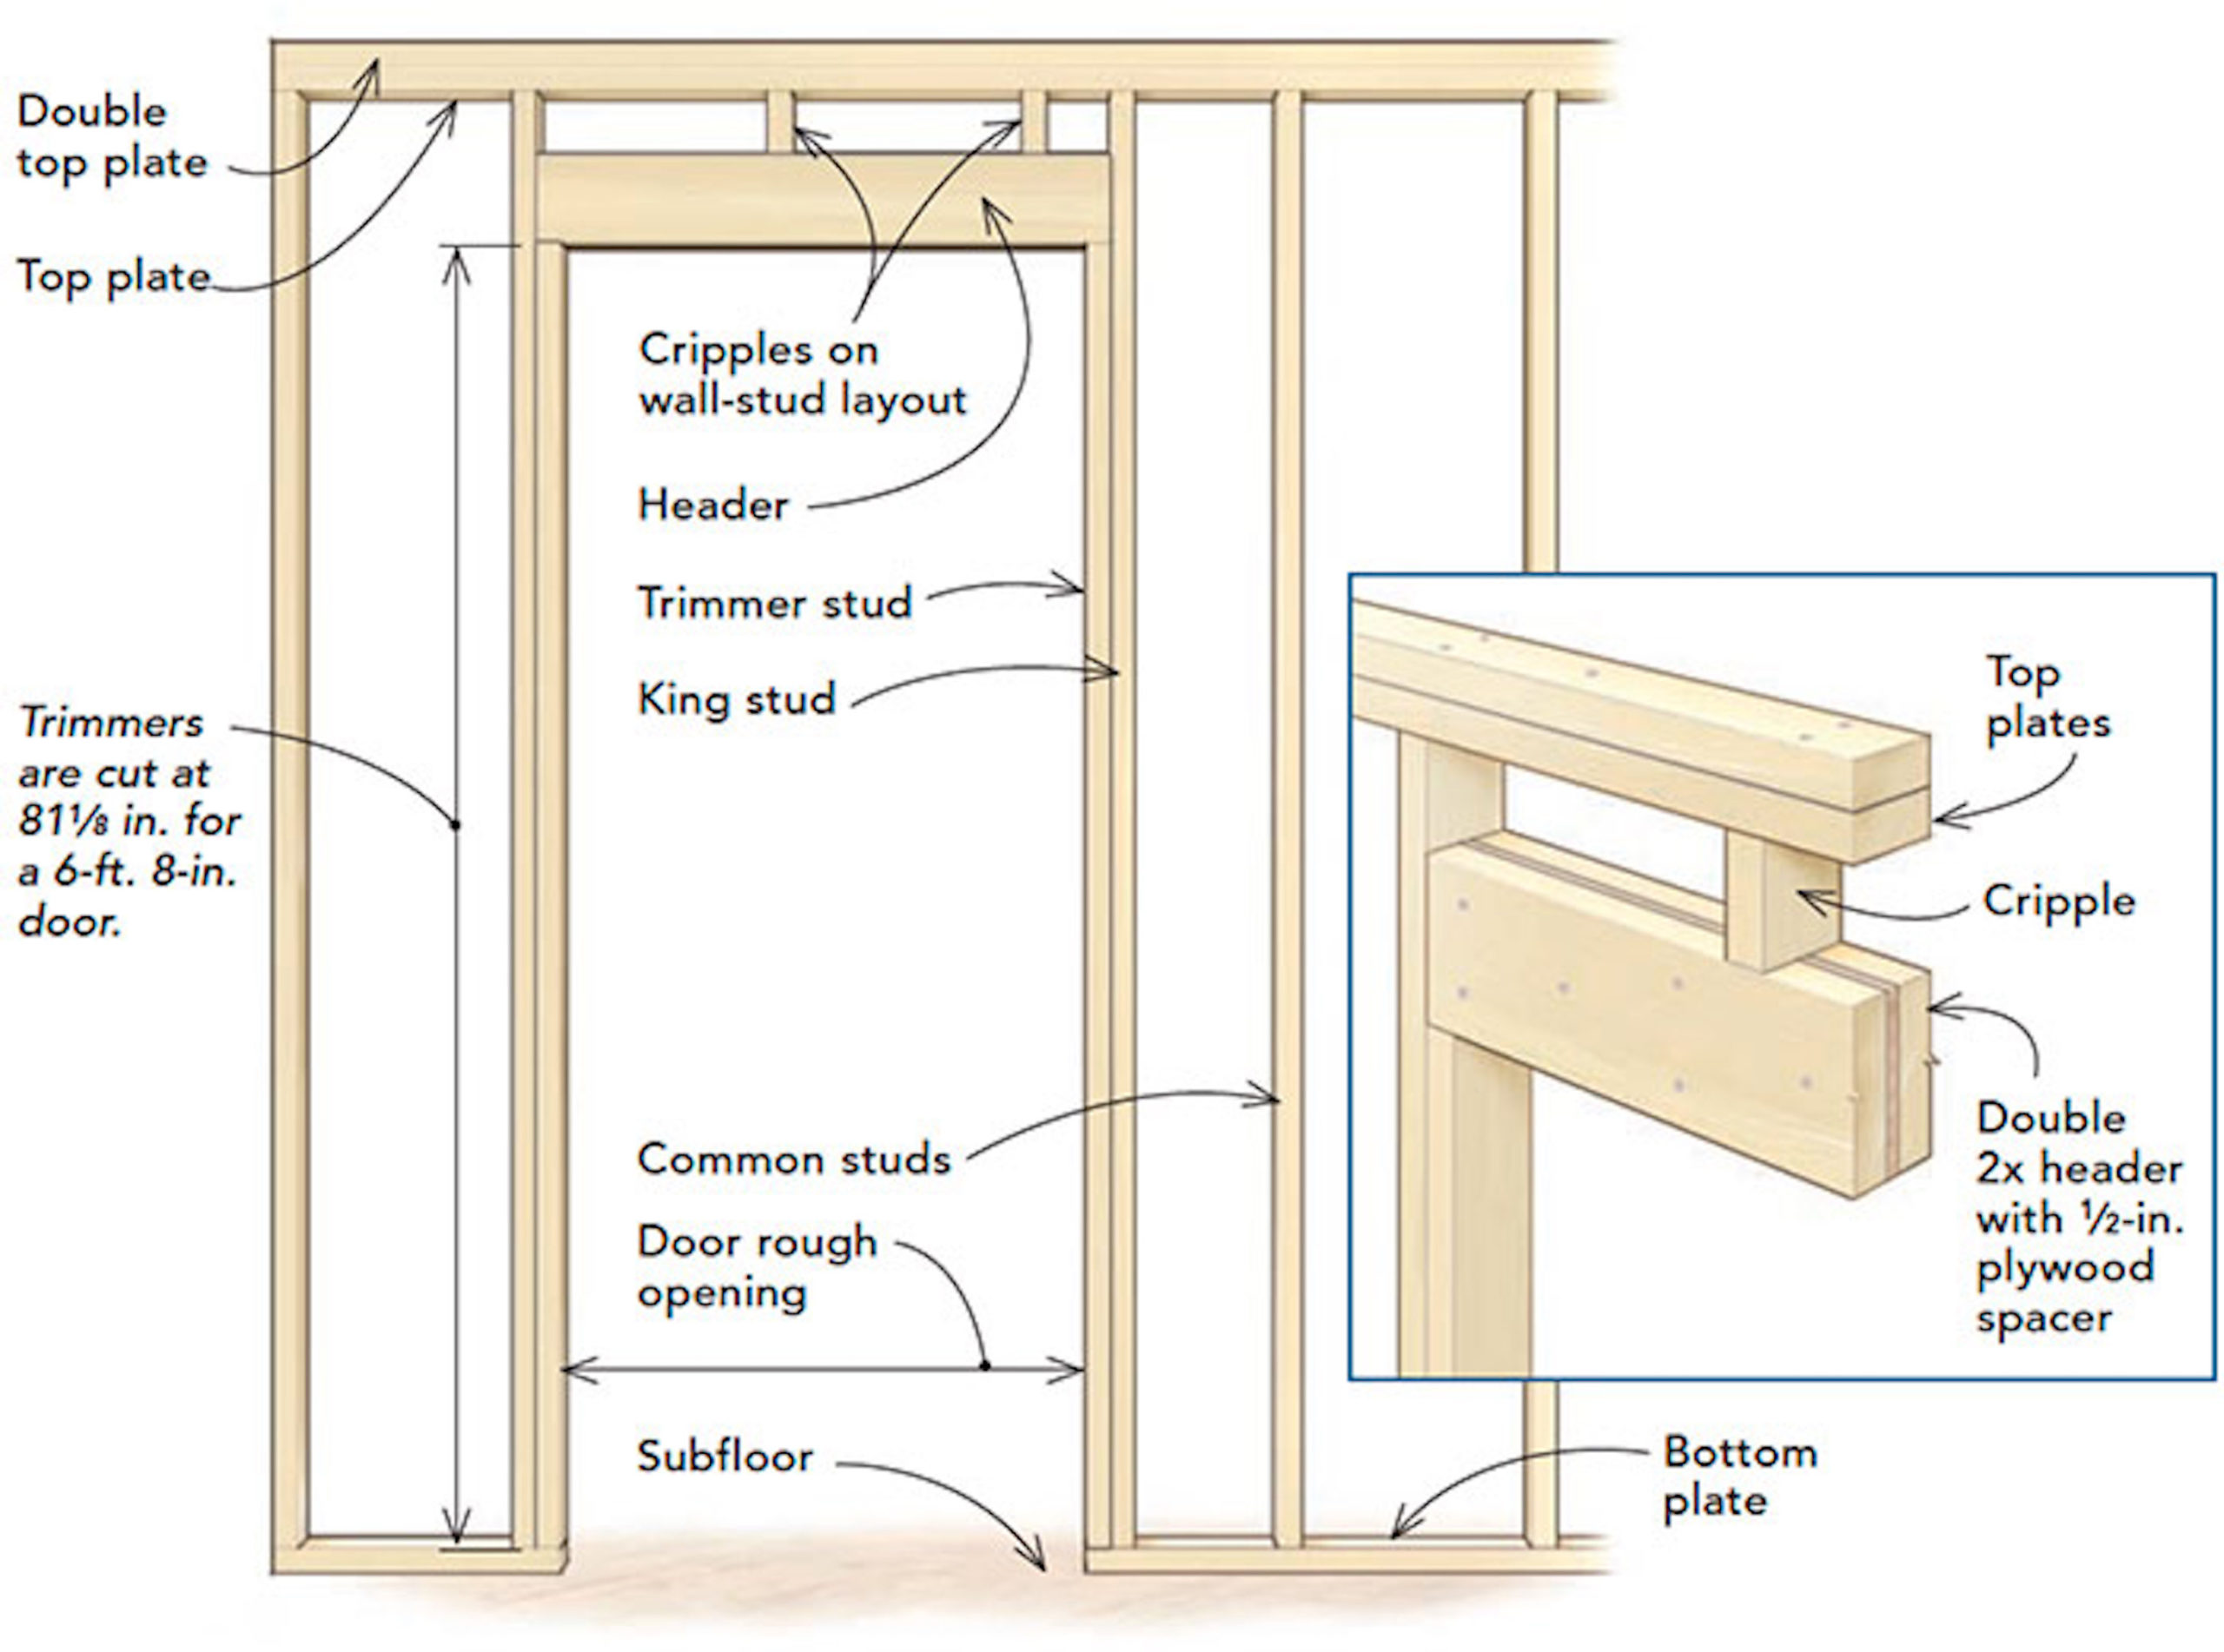 Frame a Door Rough Opening  Building a house, Framing